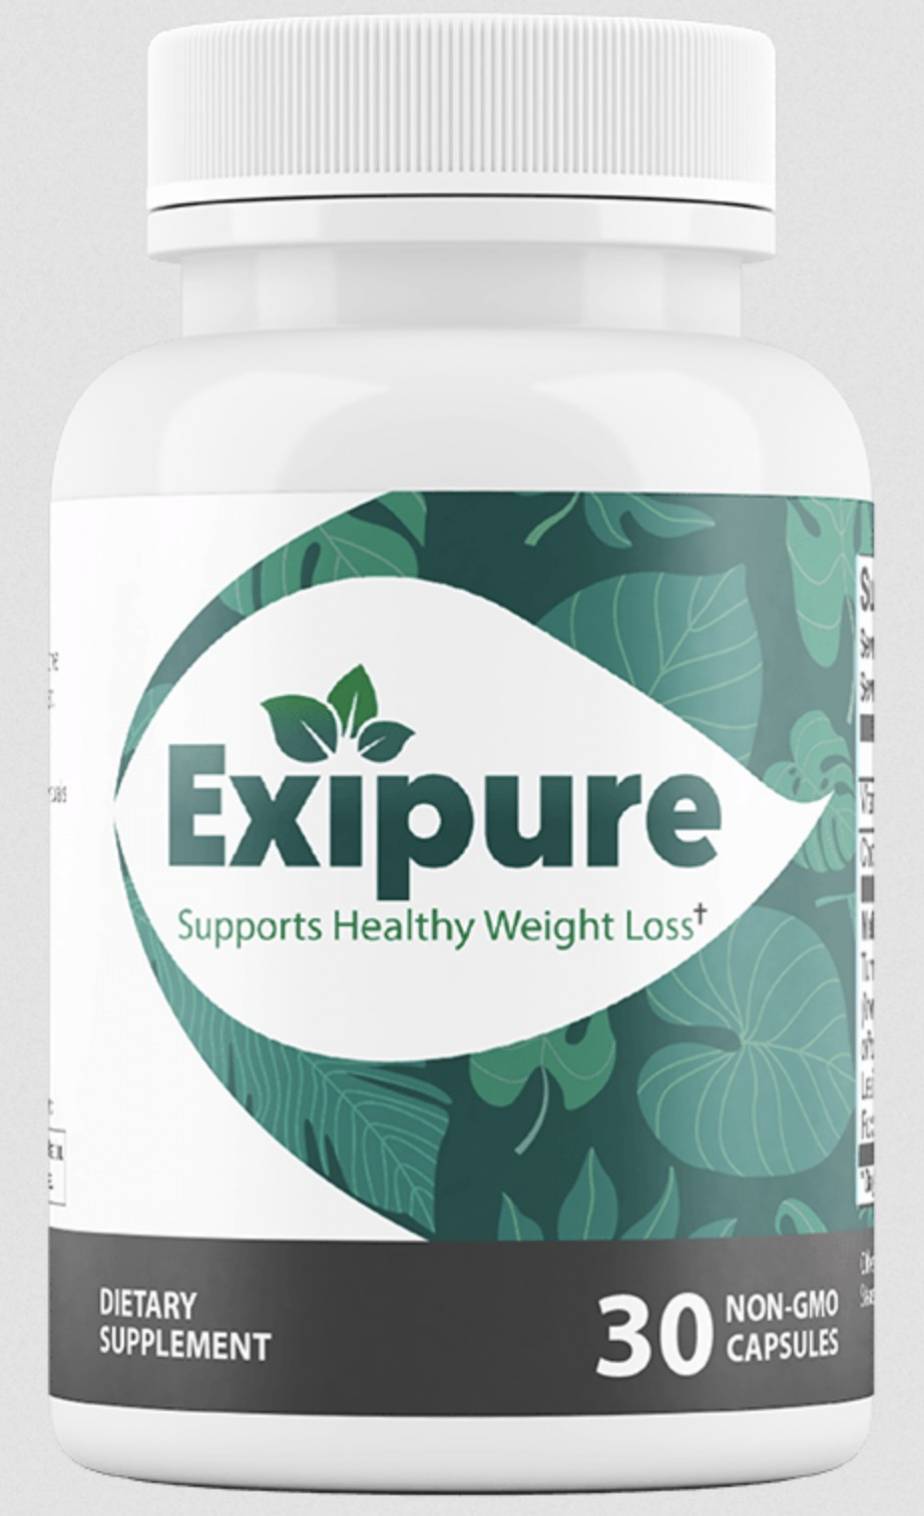 How Good Is Exipure For Weight Loss